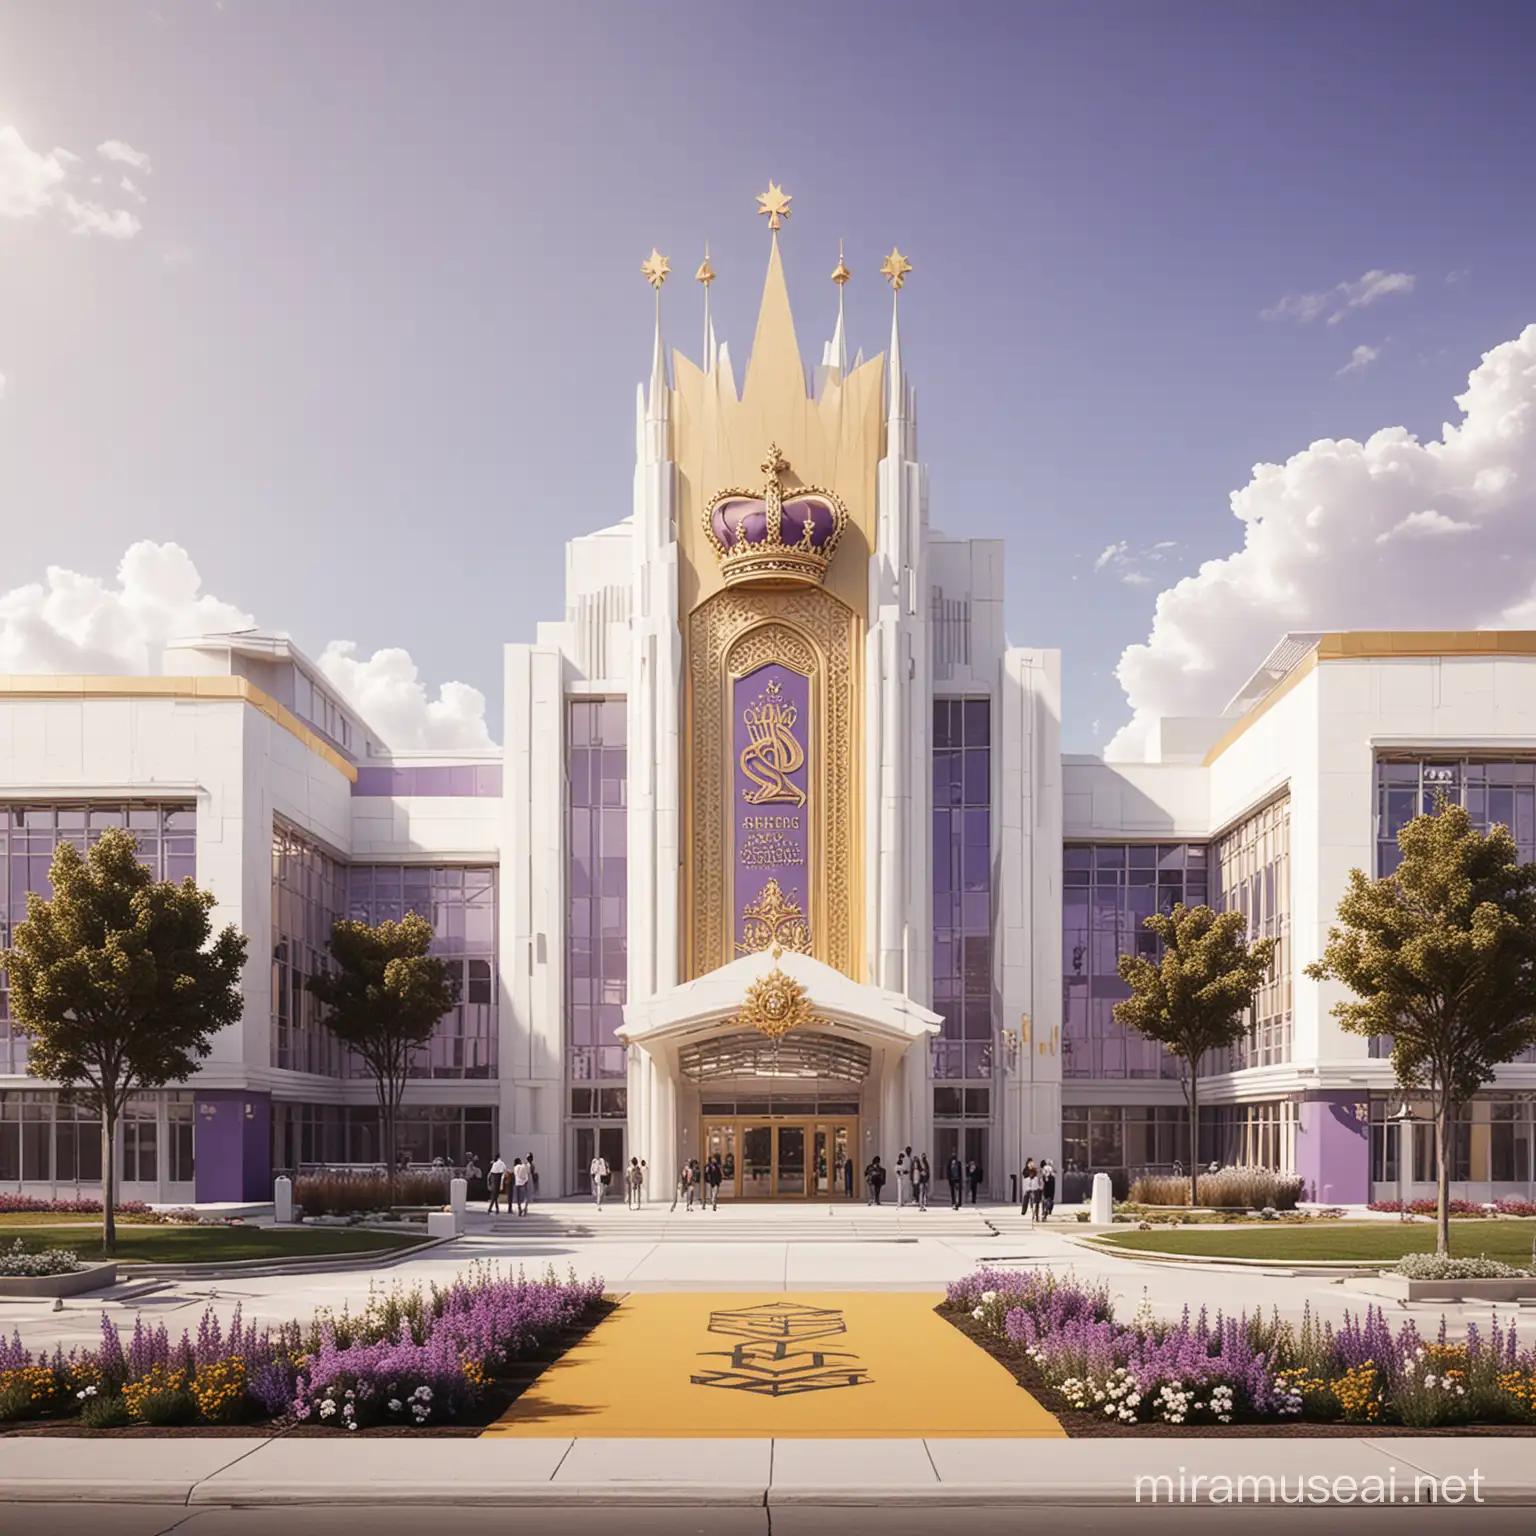 A futuristic high school with multiple white buildings, flowers and a sign with a royal crown design, with purple and gold accents.